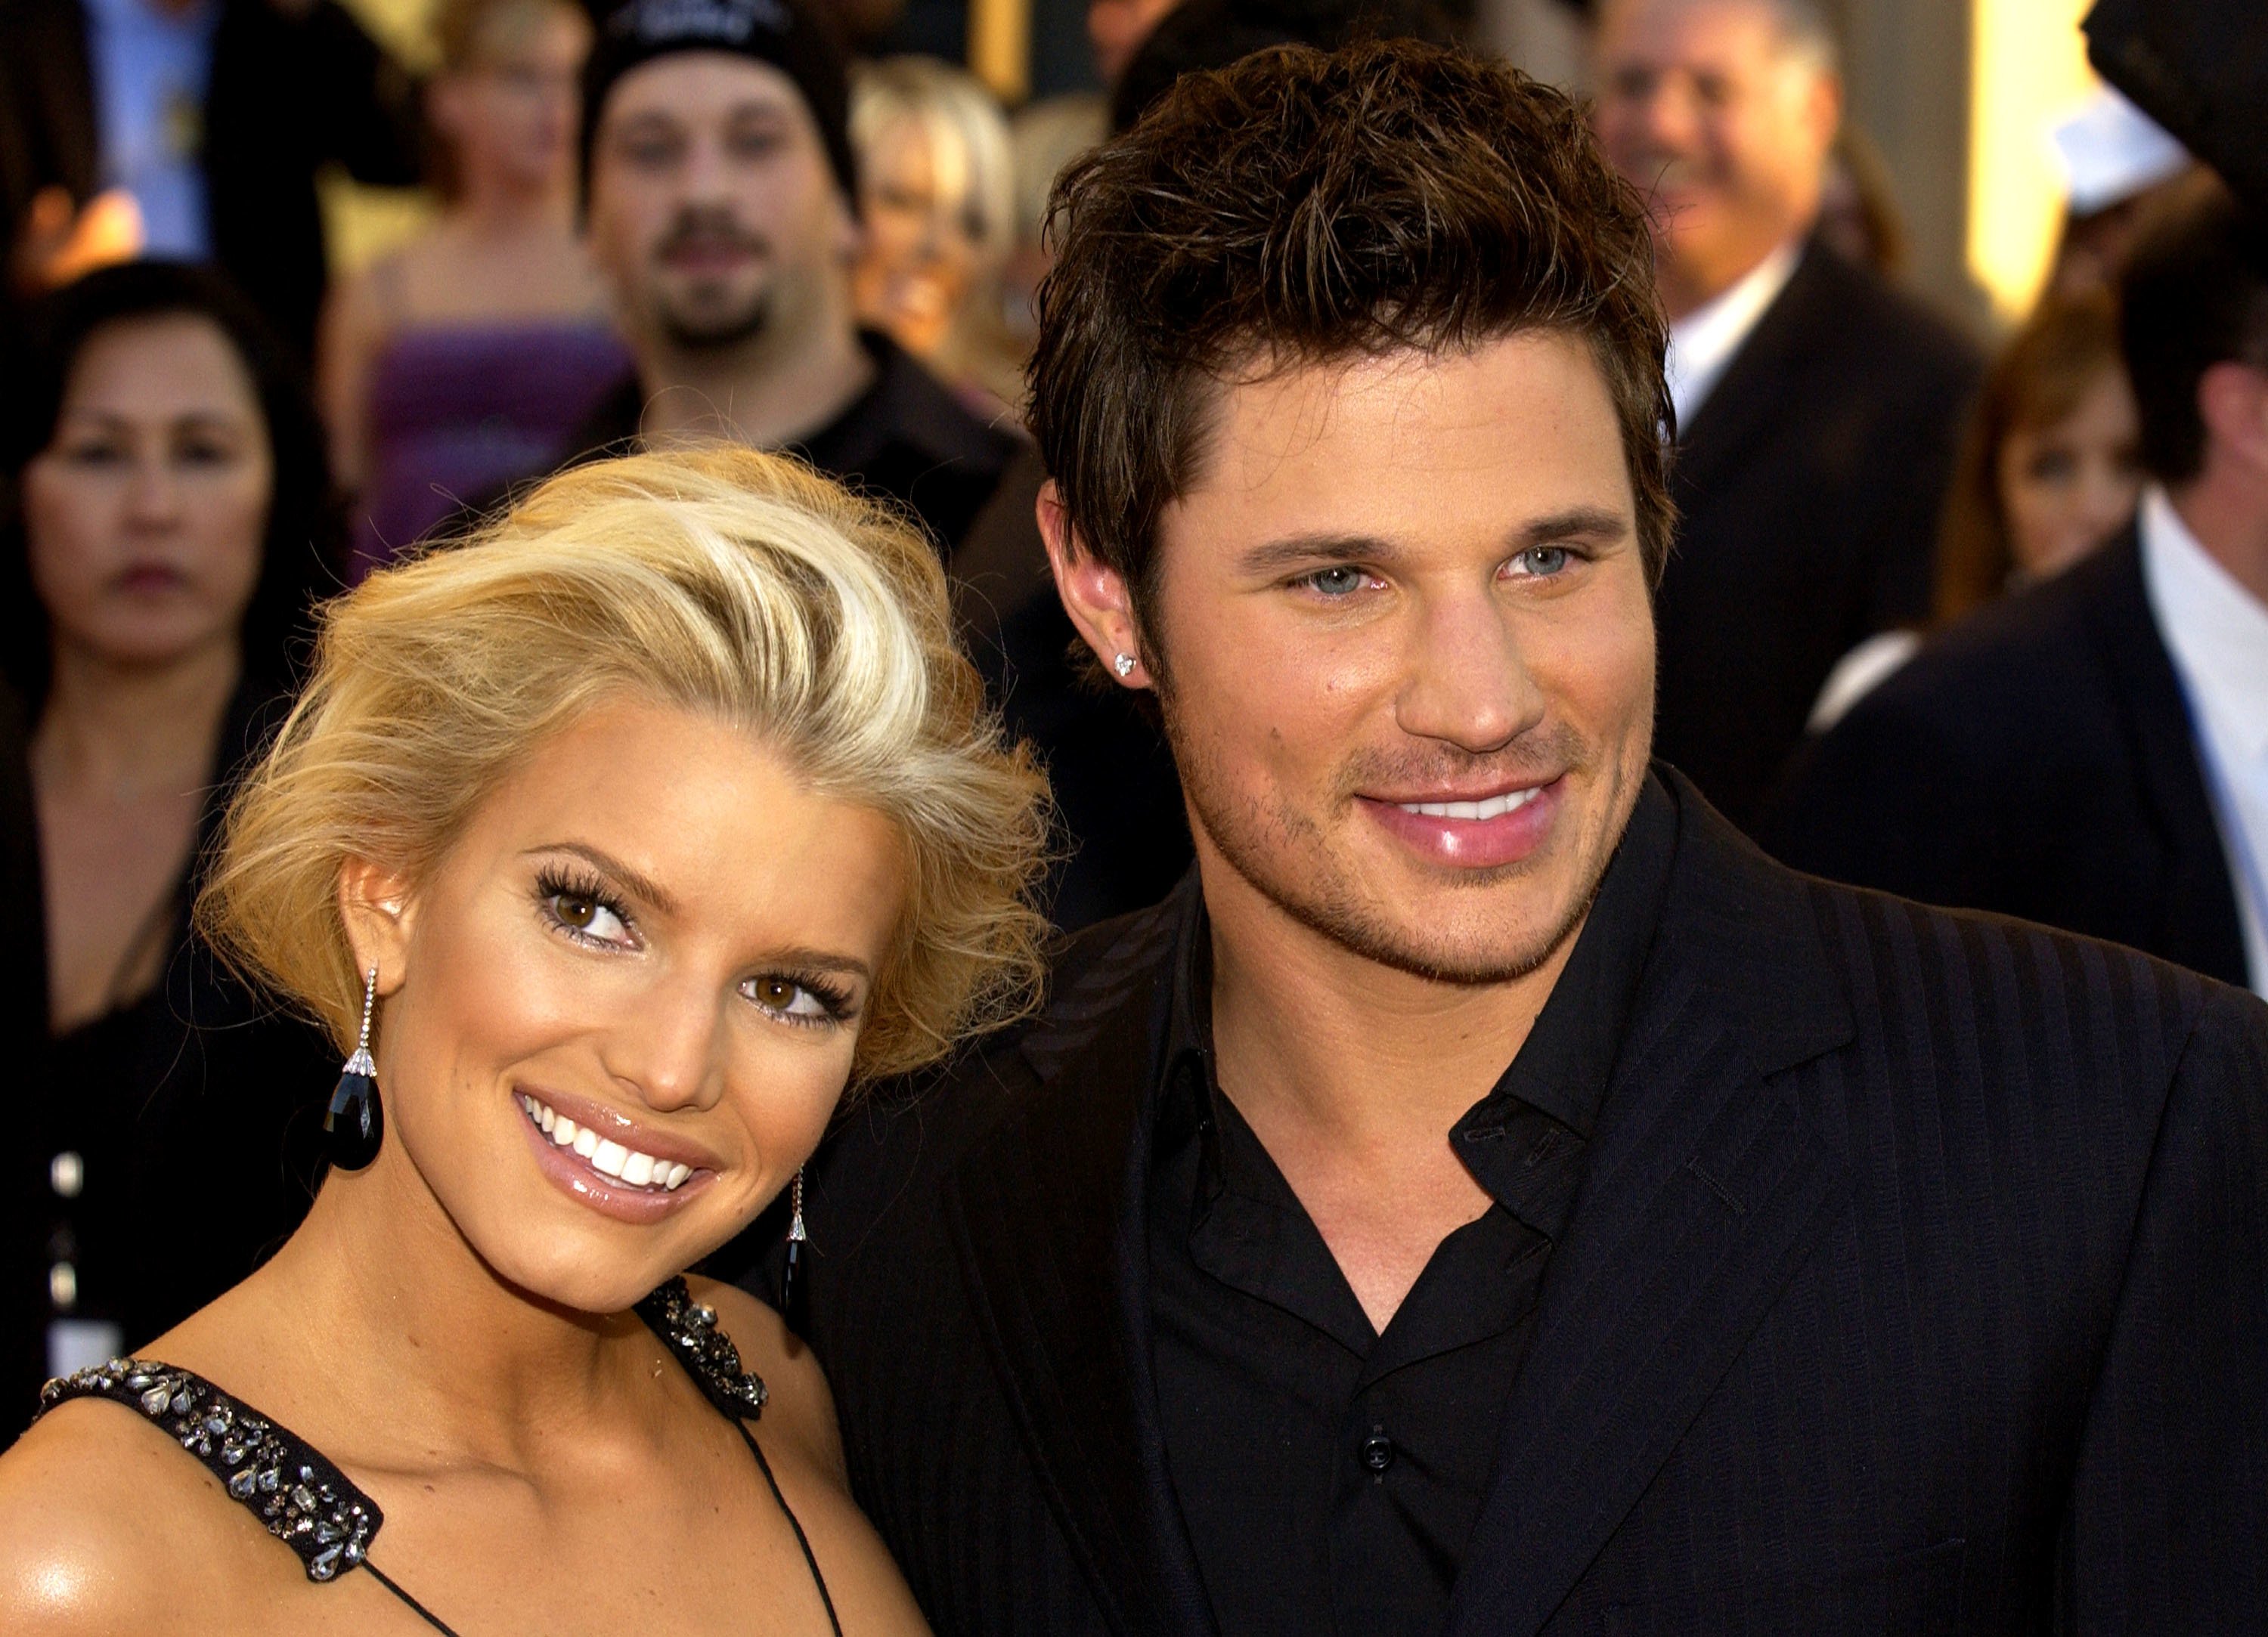 Jessica Simpson (left) and husband Nick Lachey arrive at the 32nd Annual "American Music Awards" at the Shrine Auditorium, in Los Angeles, California. | Photo: Getty Images